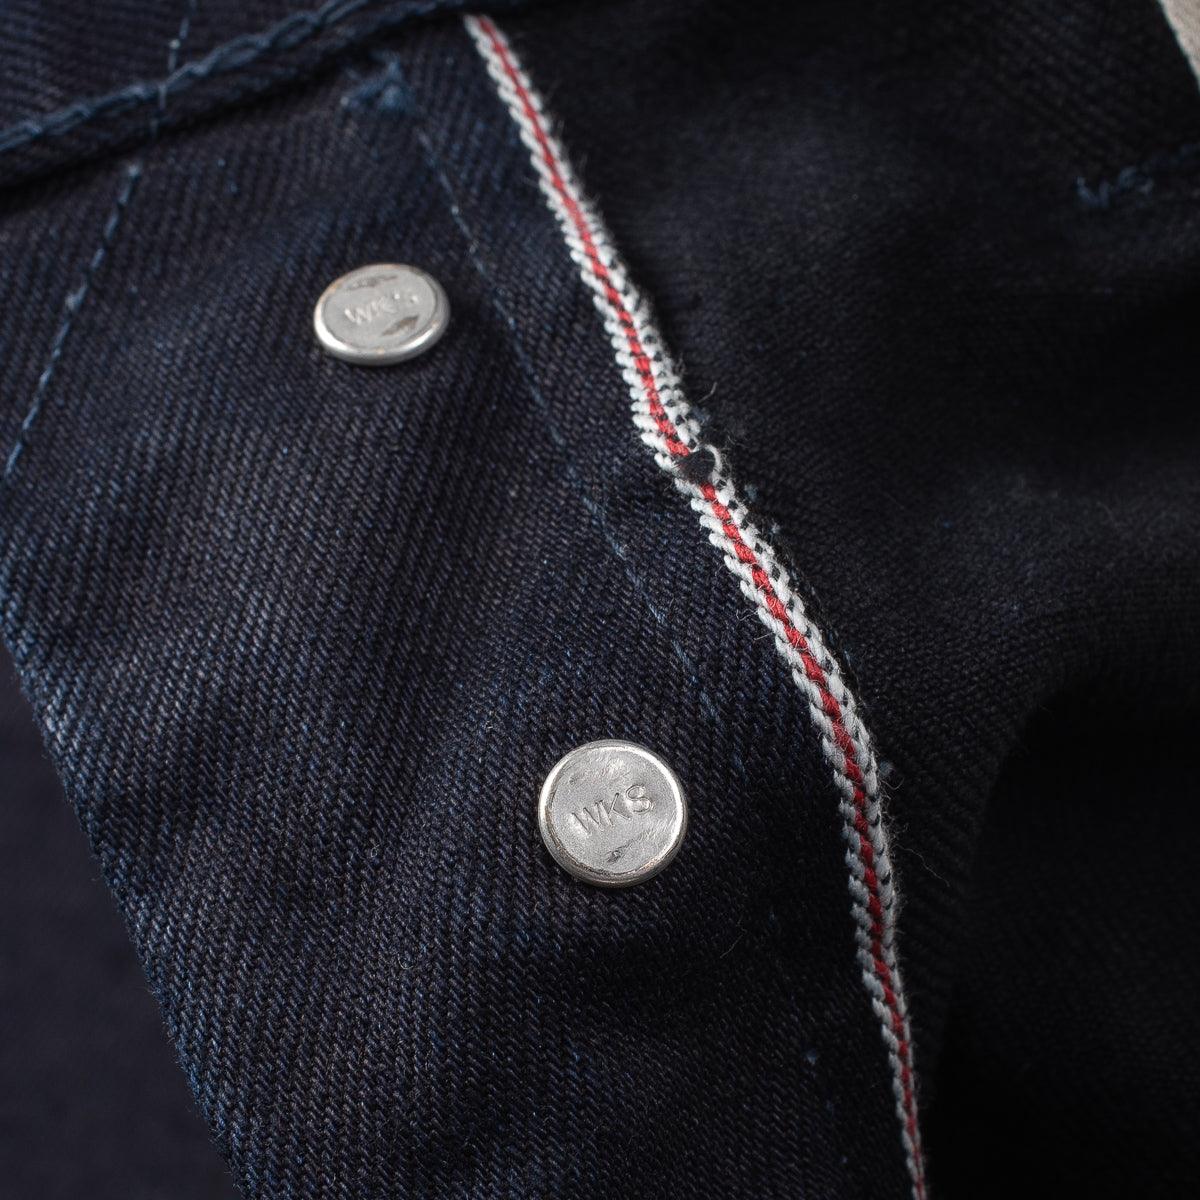 Image showing the IH-555S-142ib - 14oz Selvedge Denim Super Slim Cut Jeans Indigo/Black which is a Jeans described by the following info 555, Bottoms, Iron Heart, Jeans, Released, Slim and sold on the IRON HEART GERMANY online store